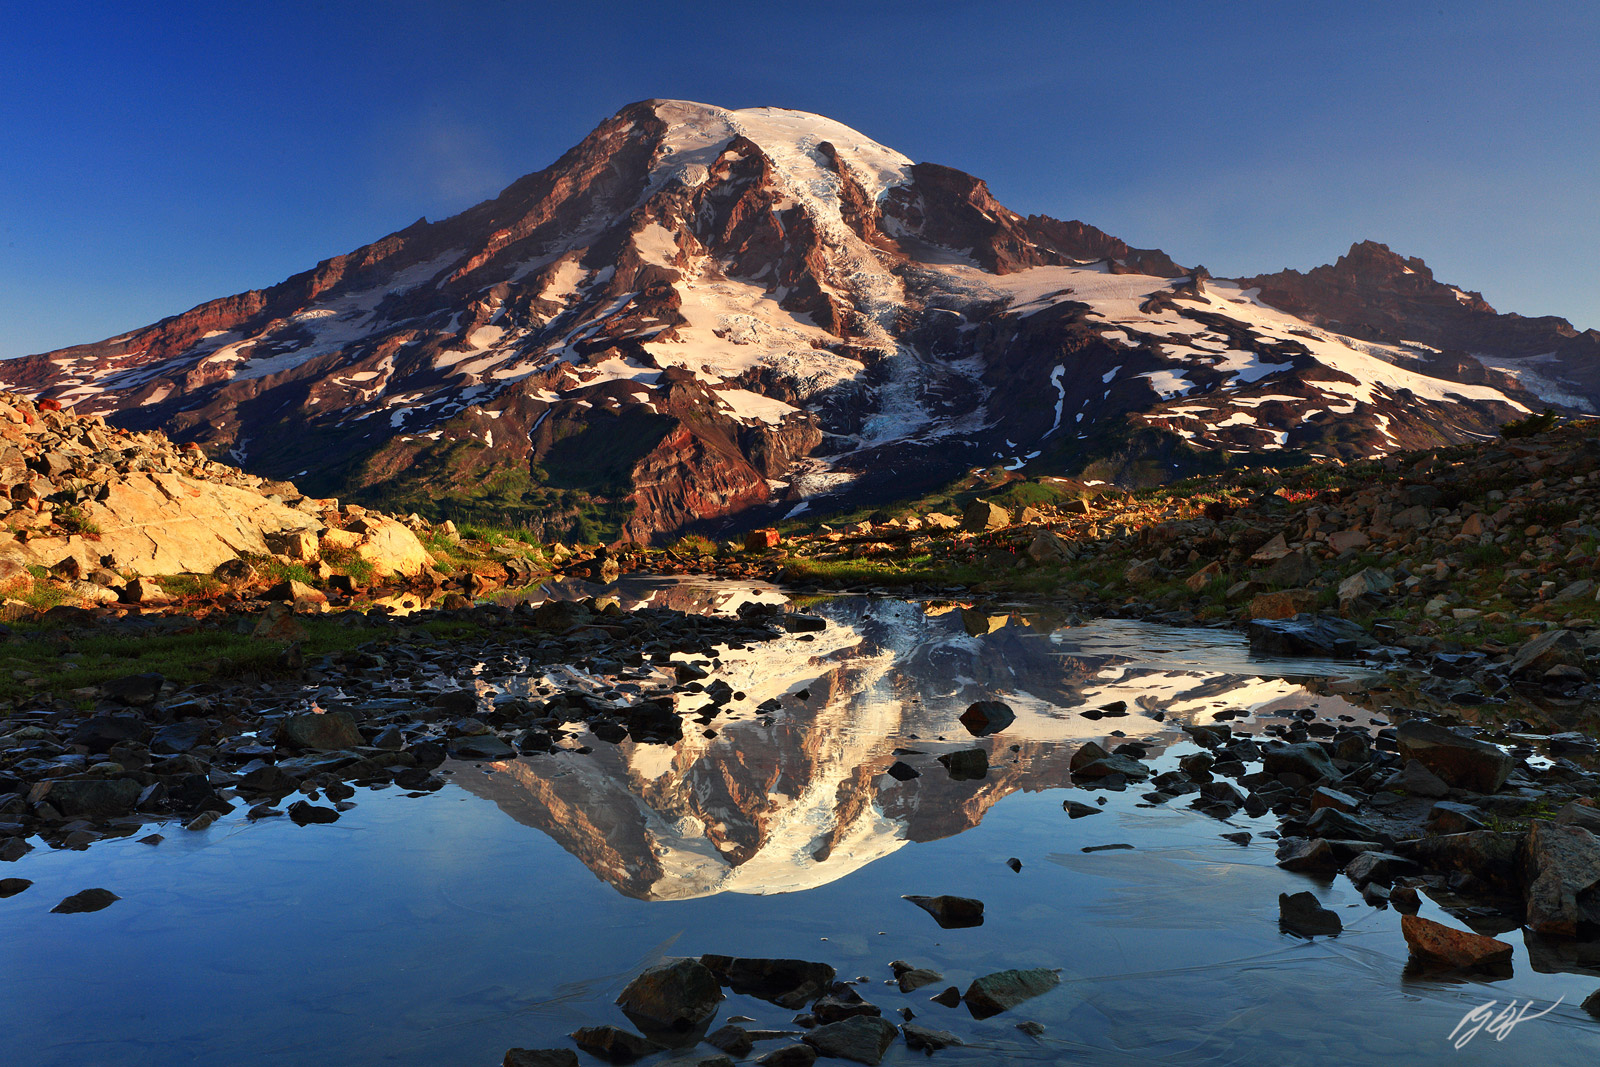 Mt Rainier Reflected in a Tarn from a Secret Place in Mt Rainier National Park in Washington